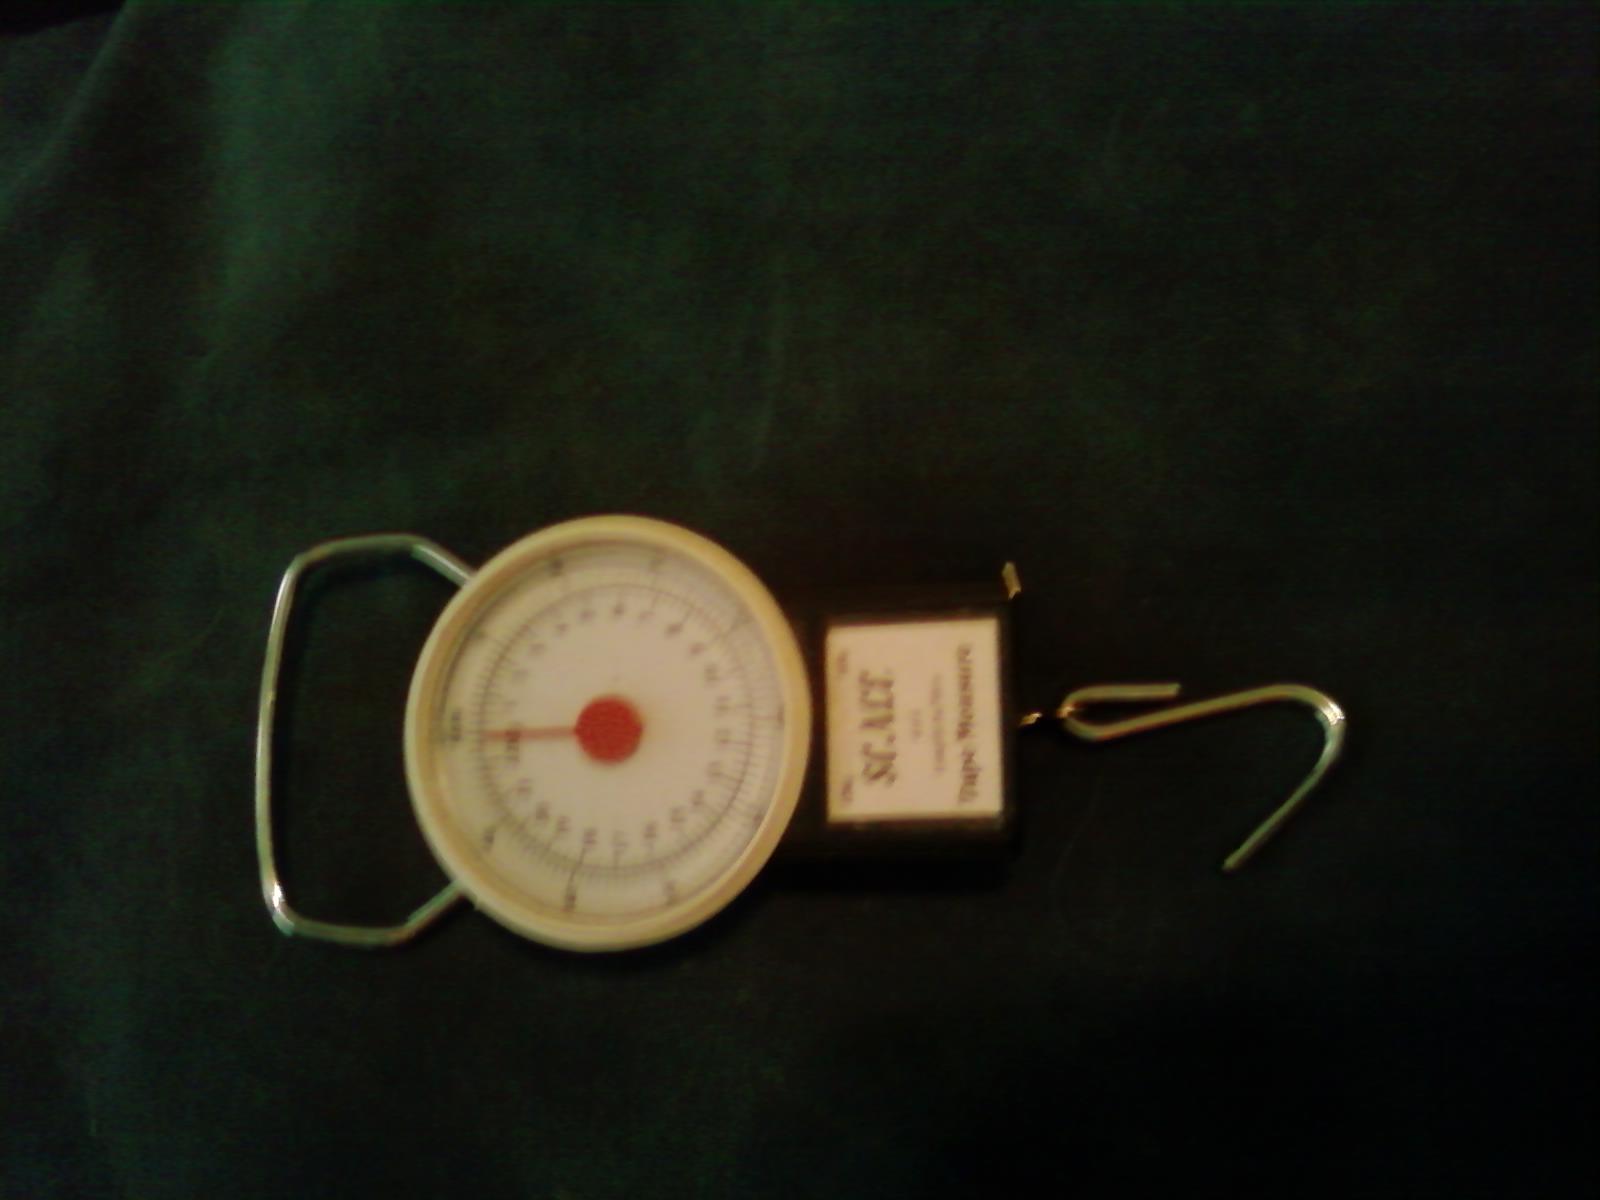 Hand held scale (weight) and length tape measure (up to 39 inches